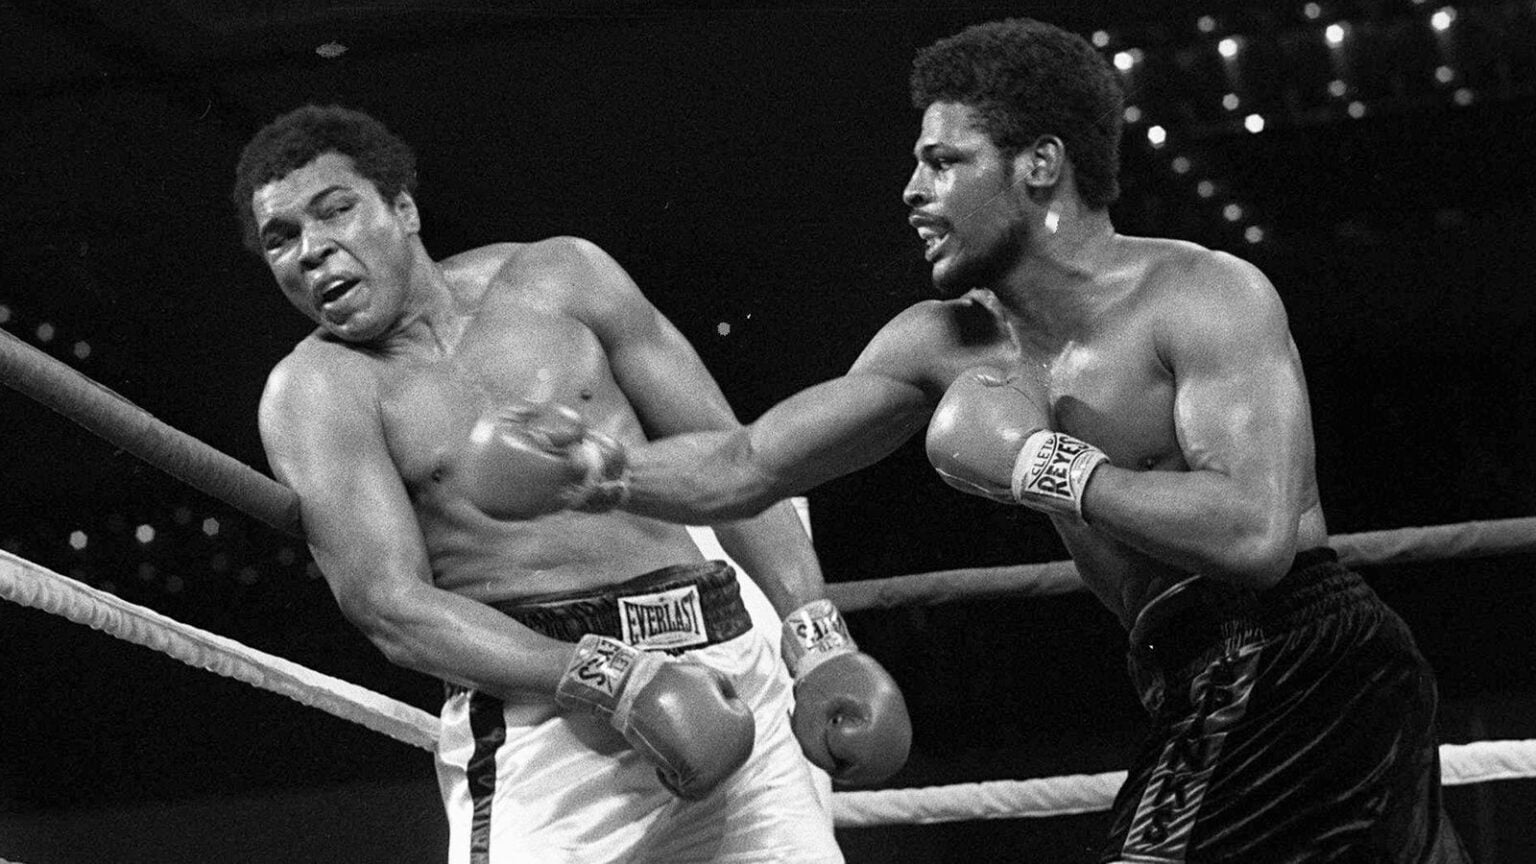 Leon Spinks Muhammad Ali Boxing today in sports history